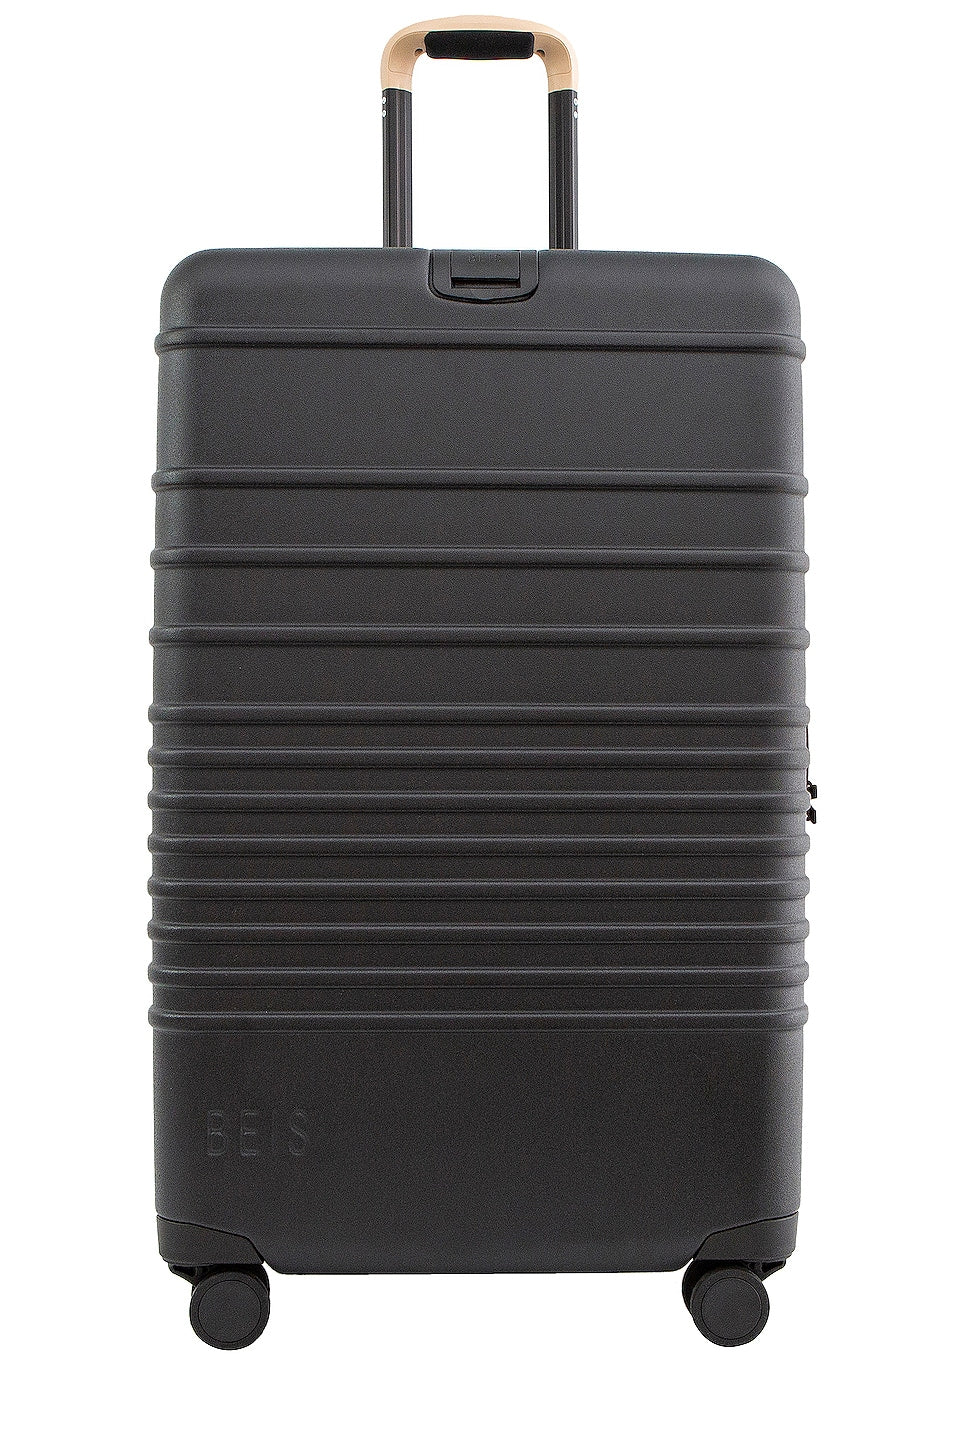 BEIS 21" Luggage The Carry-On Roller in Black